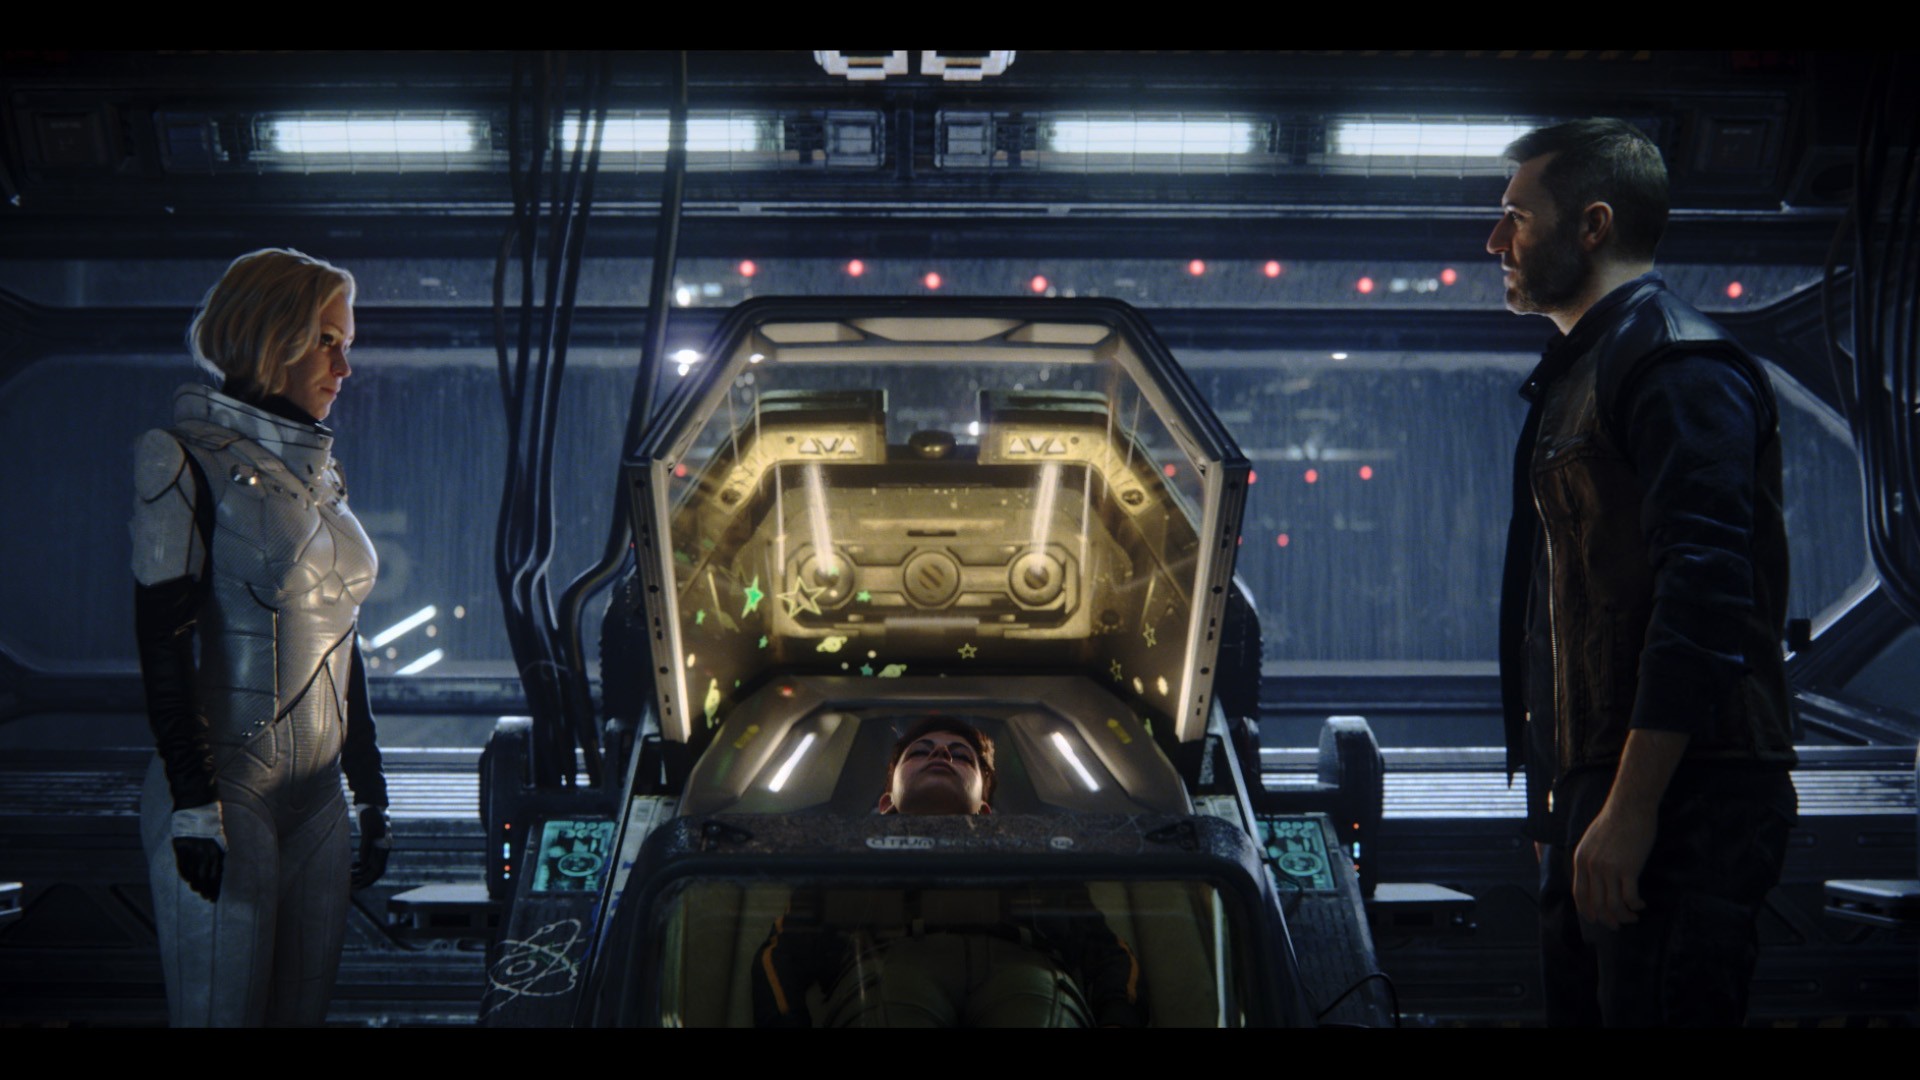 Screenshot from the animated tv series Love, Death & Robots. This still is from the episode Beyond the Aquila Drift. Here we see a woman in a white spacesuit on the left and a man wearing dark clothes on the right. They are both on a darkly lit spaceship and between them is a person in a sleeping pod.